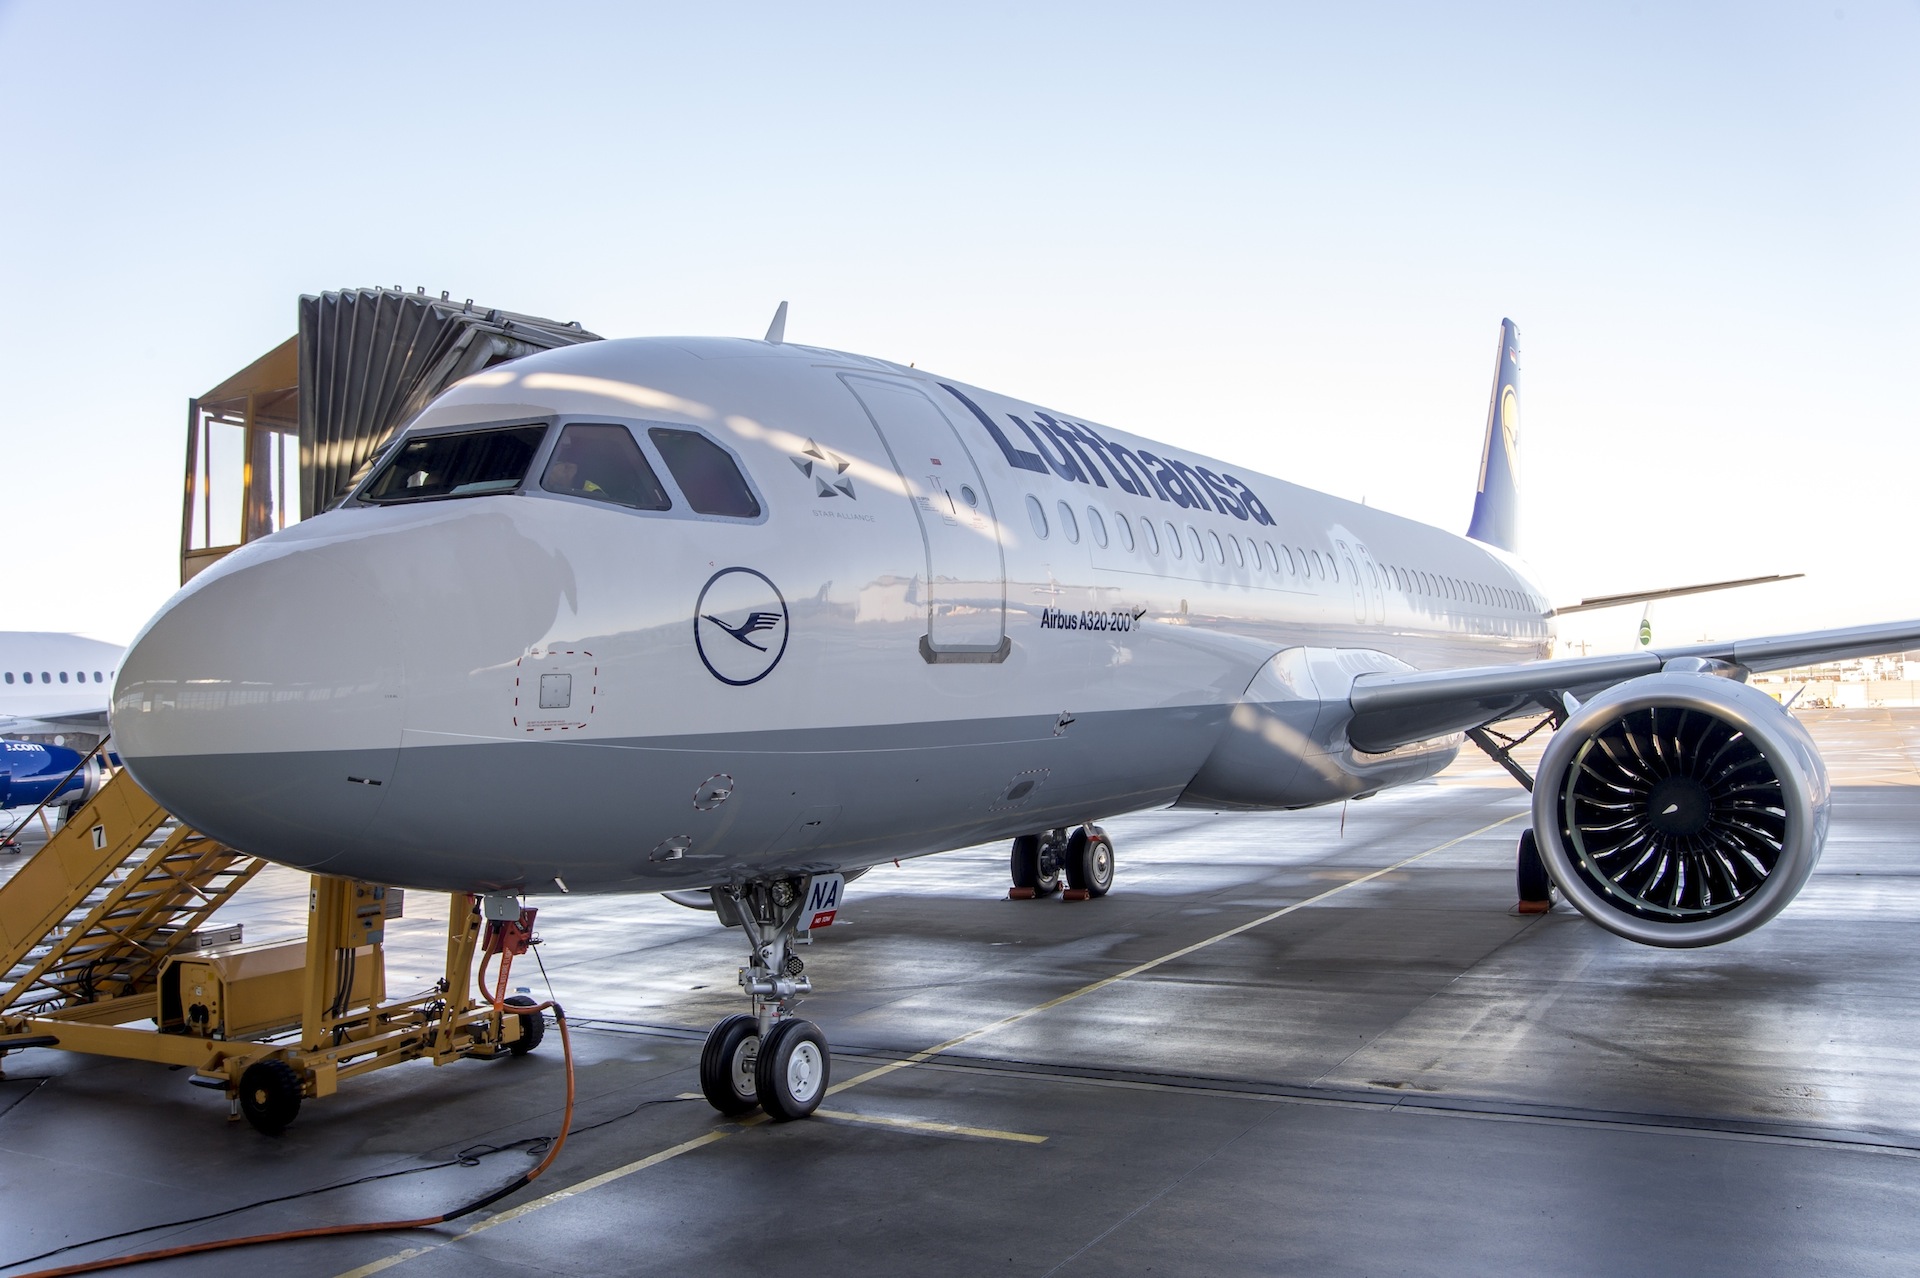 Lufthansa Airbus A320neo D-AINA. Photo courtesy the airline.